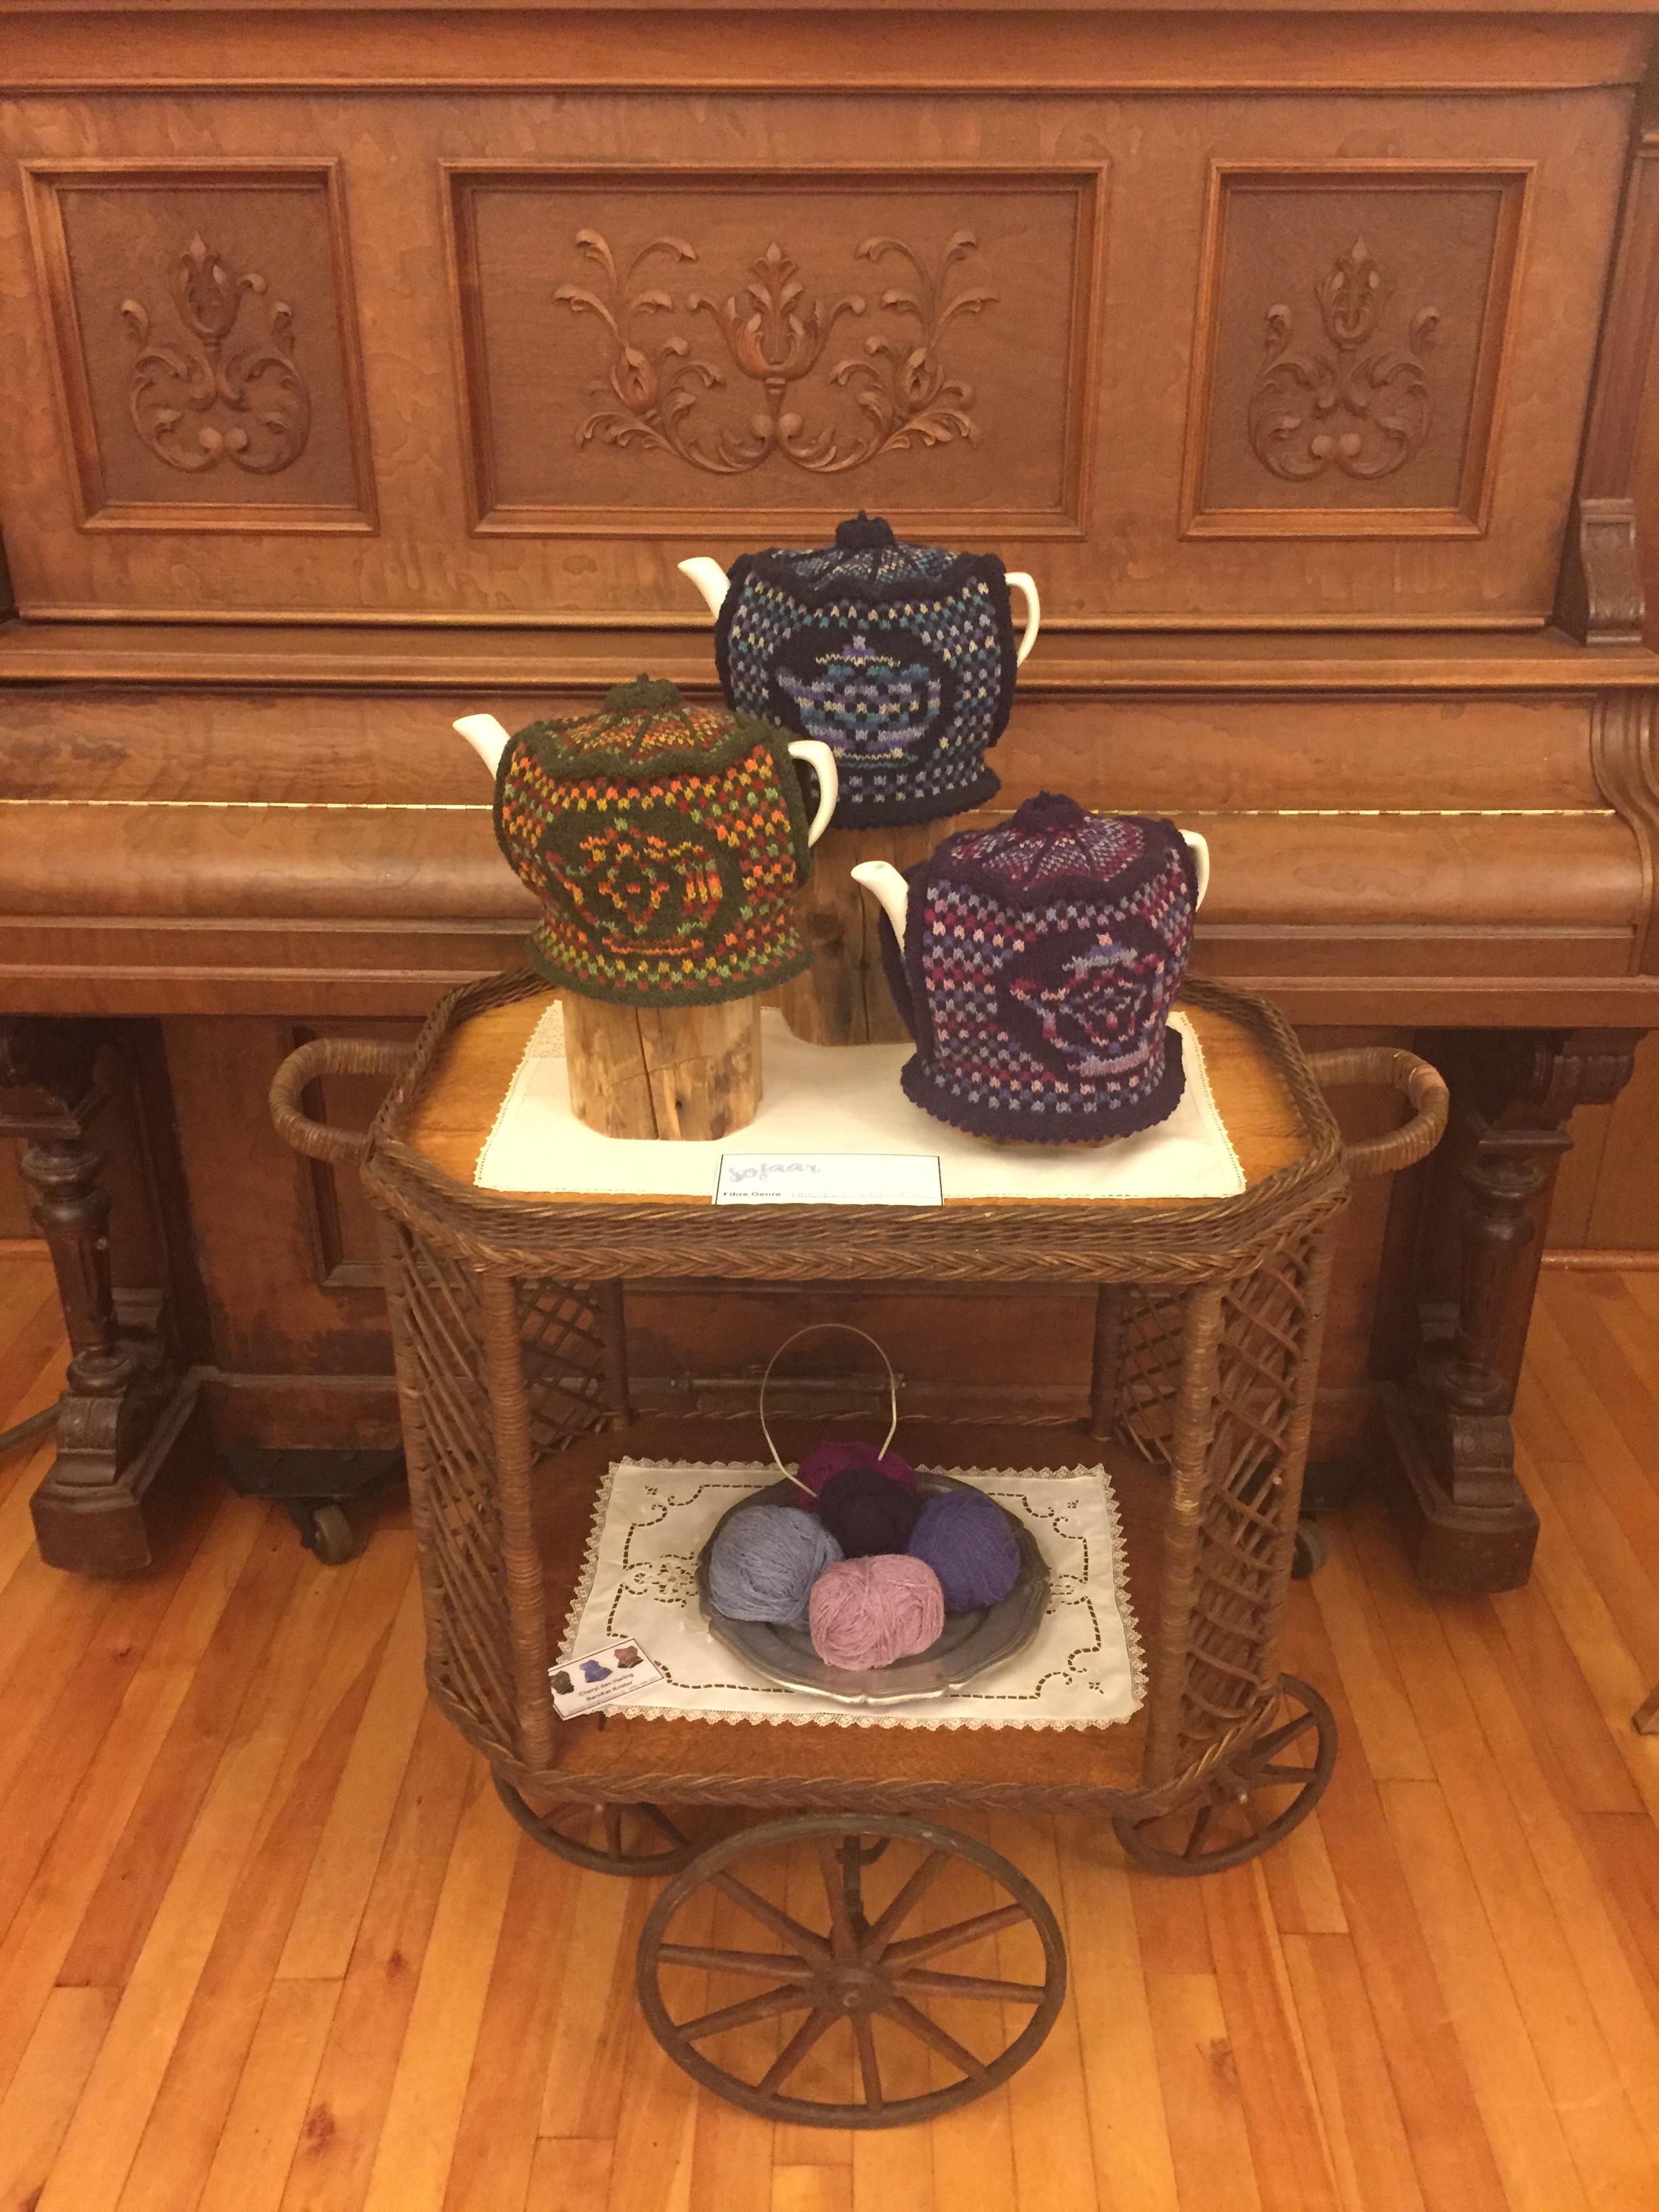 Knitted tea cosies